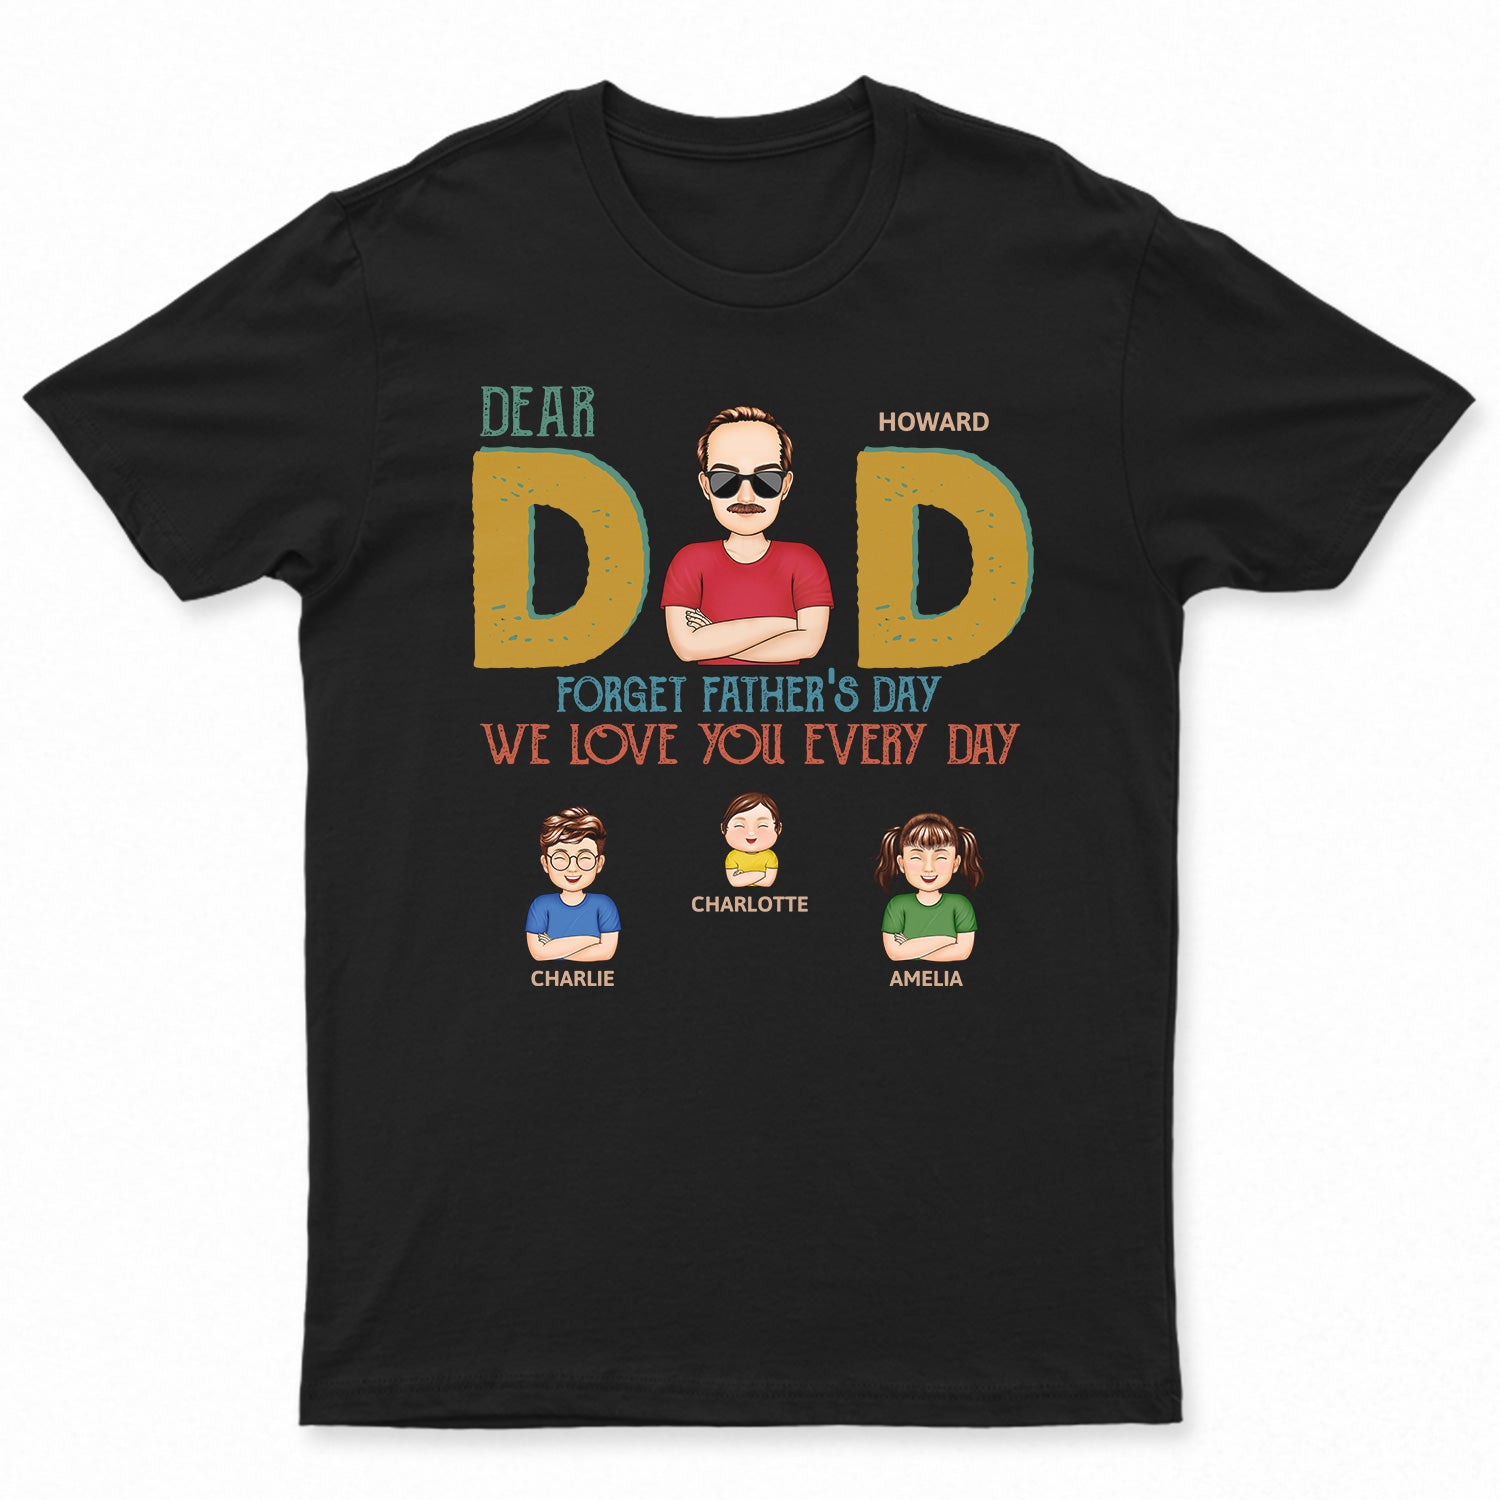 We Love You Every Day, We Are Awesome Thank You - Birthday, Loving Gift For Dad, Father, Papa, Grandpa, Grandfather - Personalized Custom T Shirt